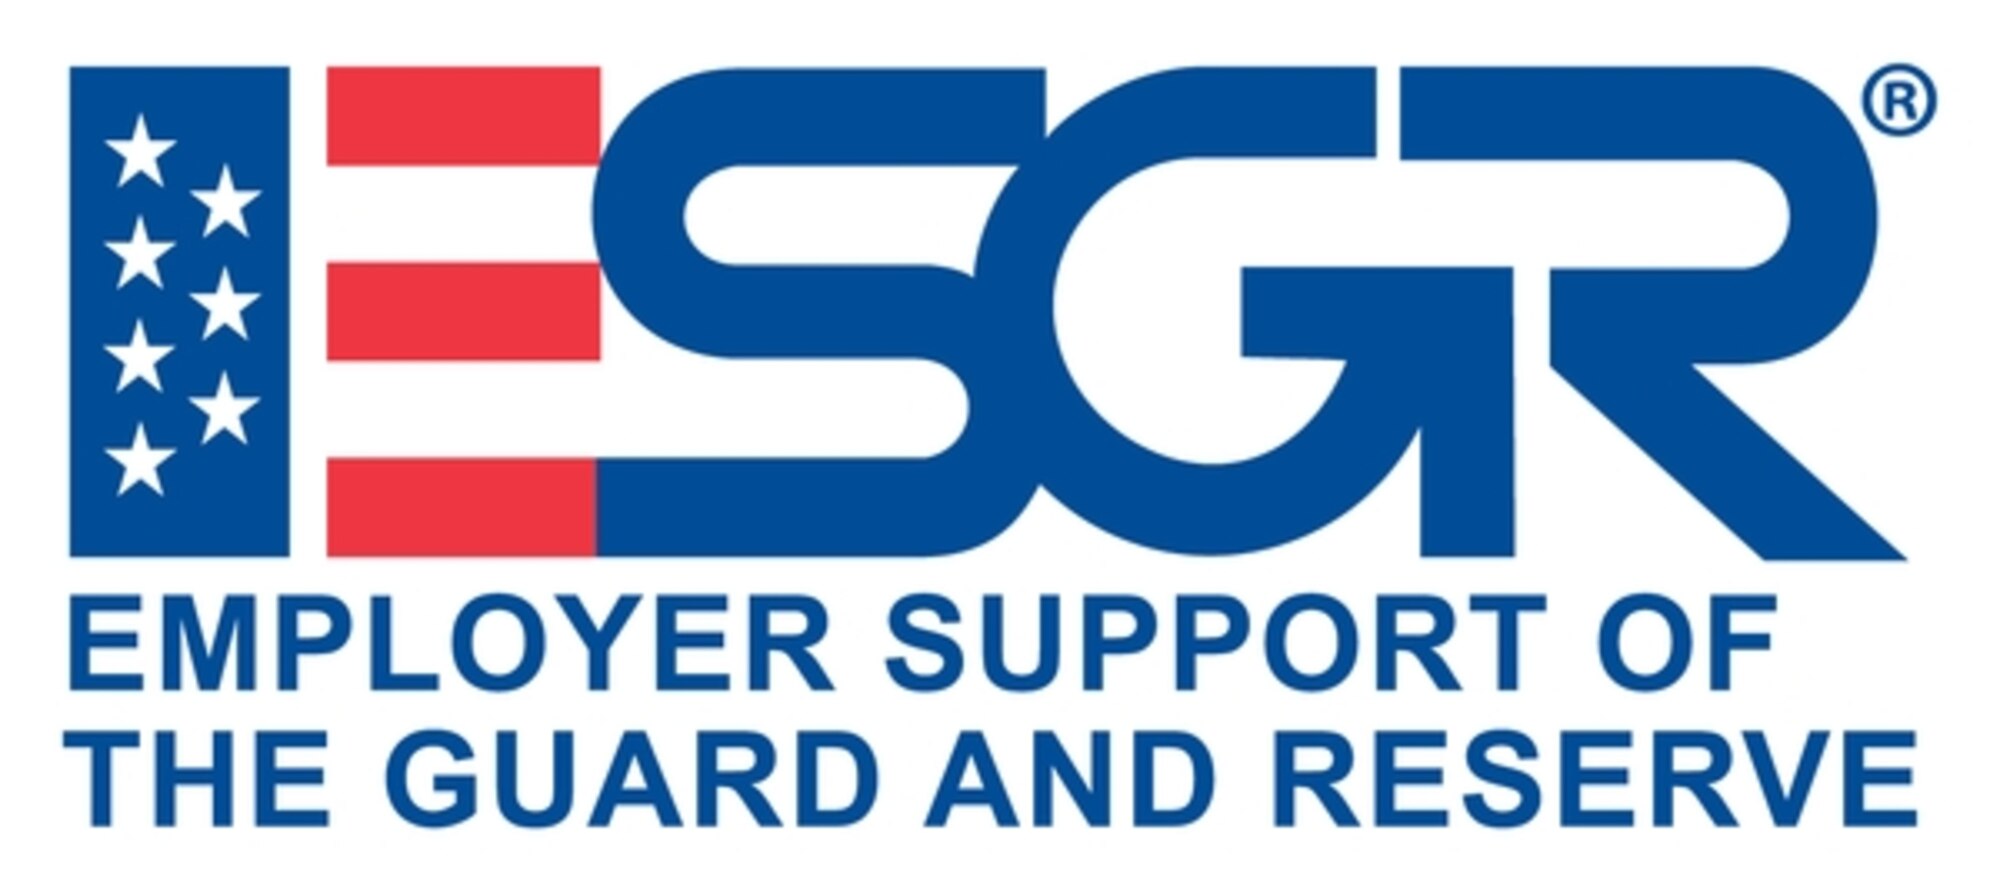 Employer Support of the Guard and Reserve, a Department of Defense office, is now accepting nominations for the 2014 Secretary of Defense Employer Support Freedom Award.